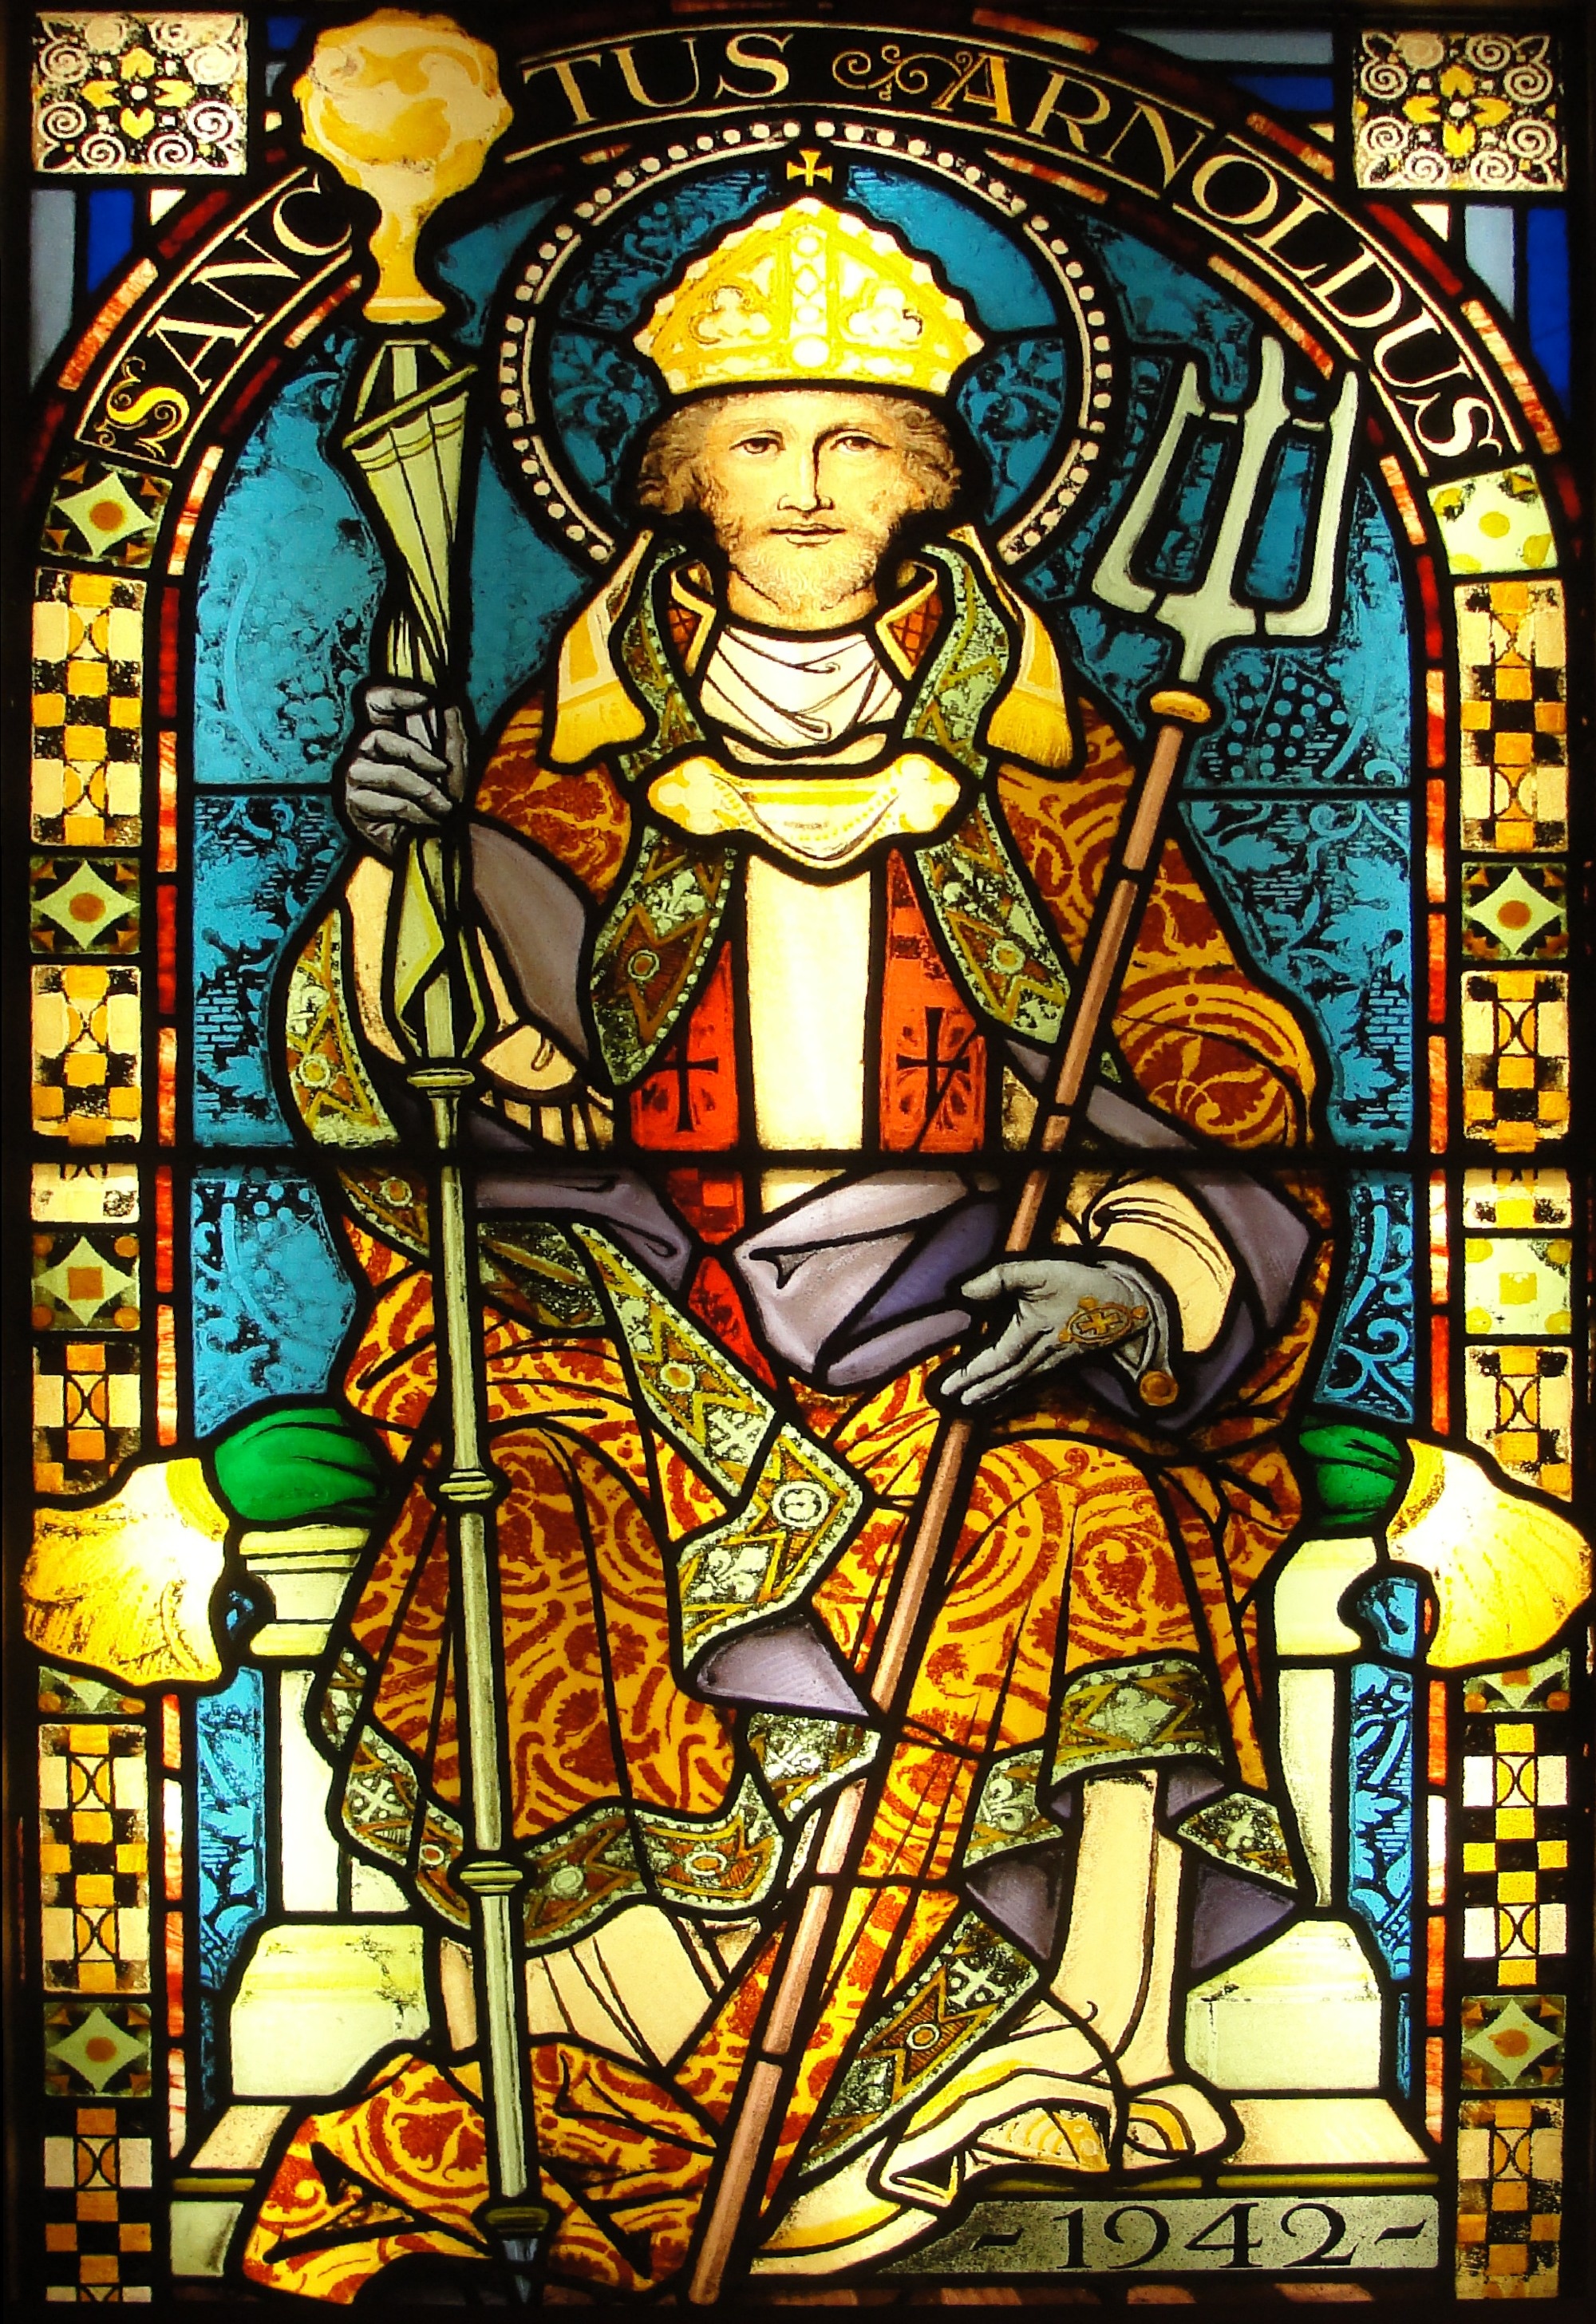 Saint Arnold of Soissons is the patron saint of beer. He encouraged local peasants to drink beer, "the gift of health." His brewery saved many lives during the plague in Belgium.